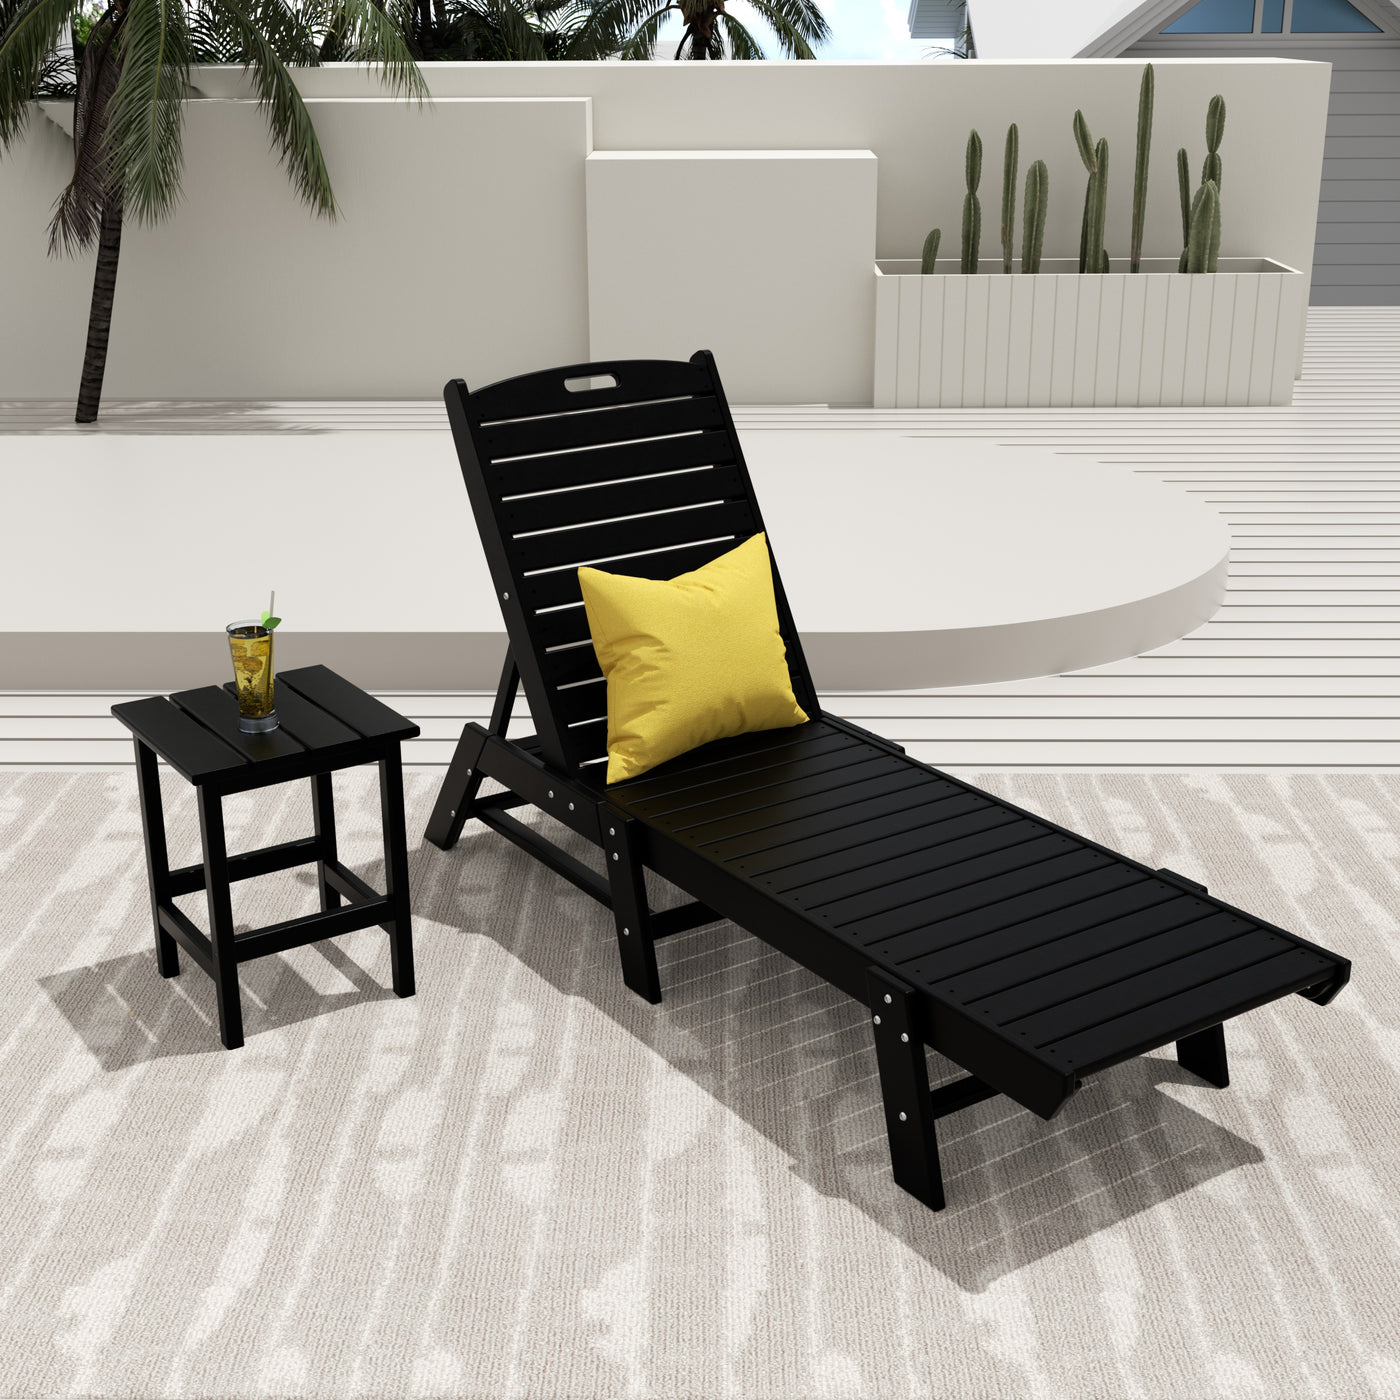 Malibu 2-Piece Poly Reclining Outdoor Patio Chaise Lounge Chair with Side Table Set